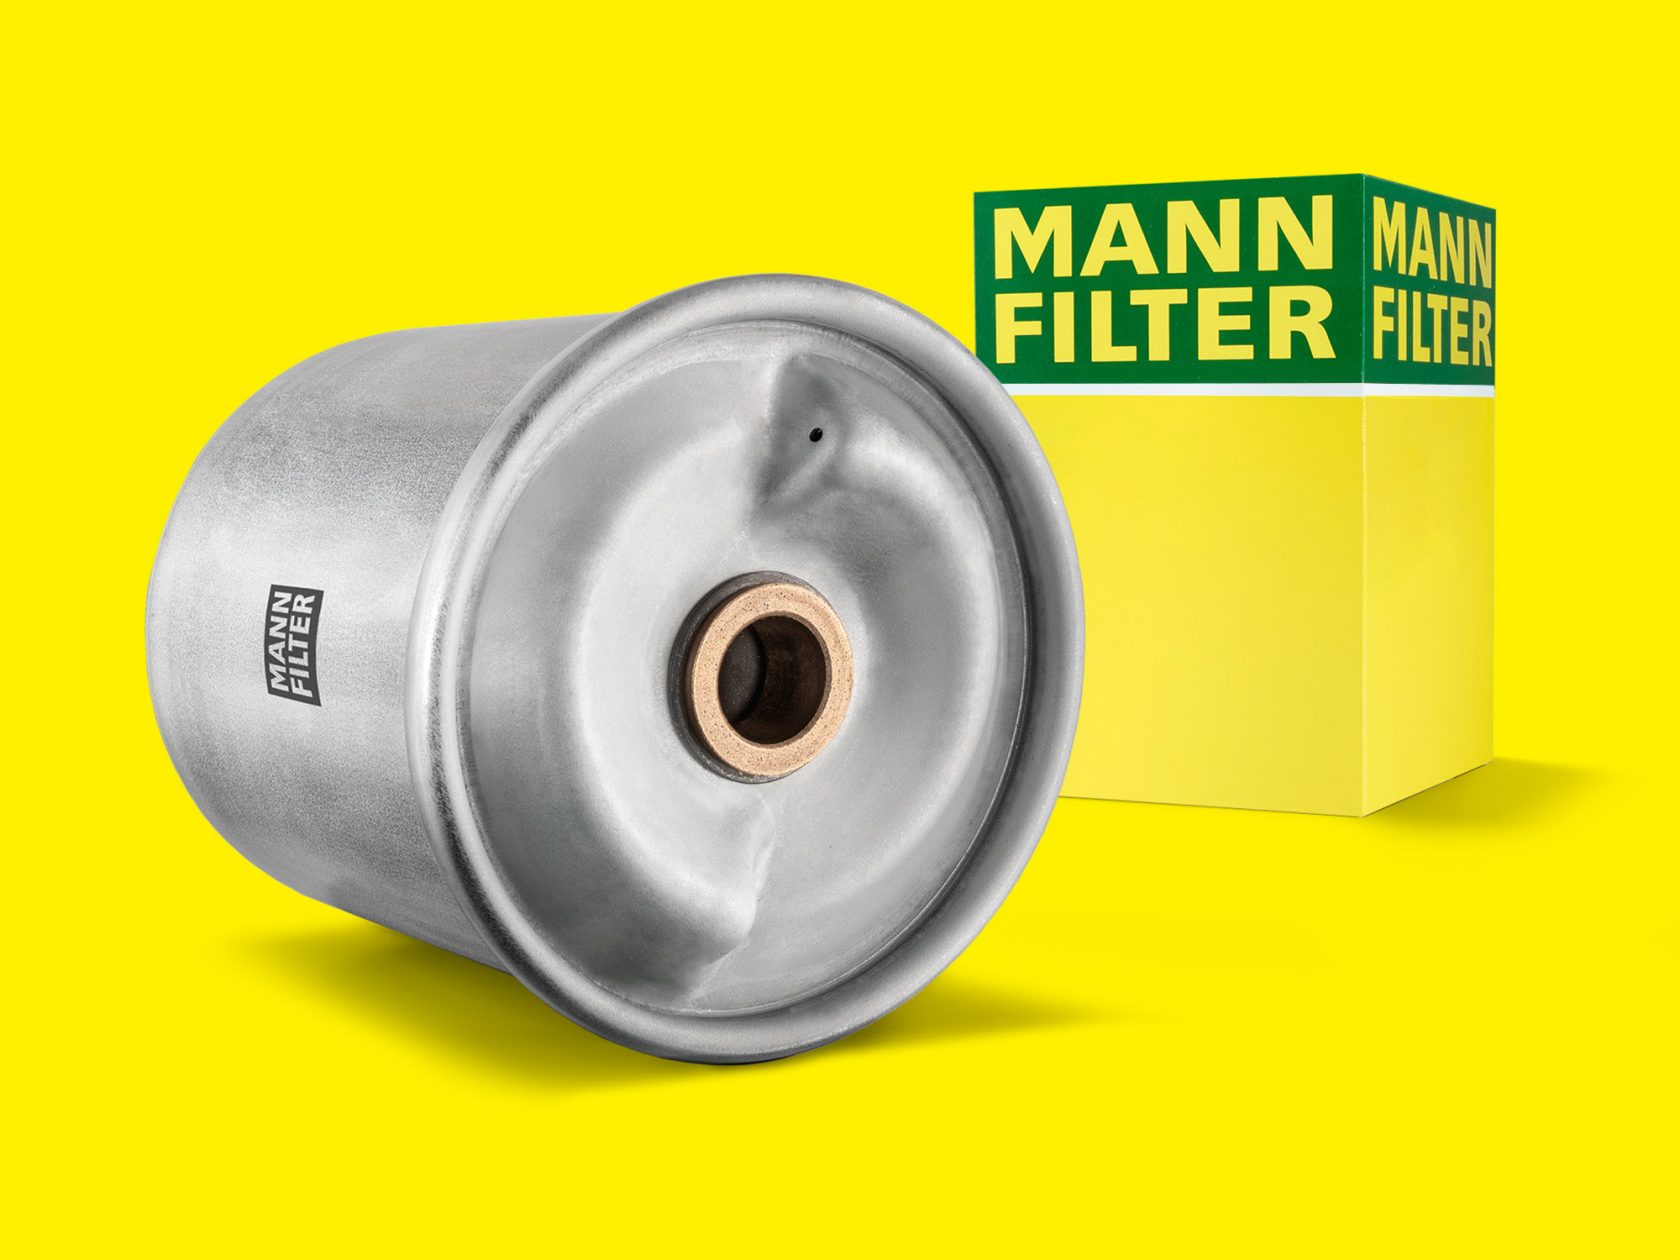 MANN-FILTER centrifuge rotors separate soot particles from the oil